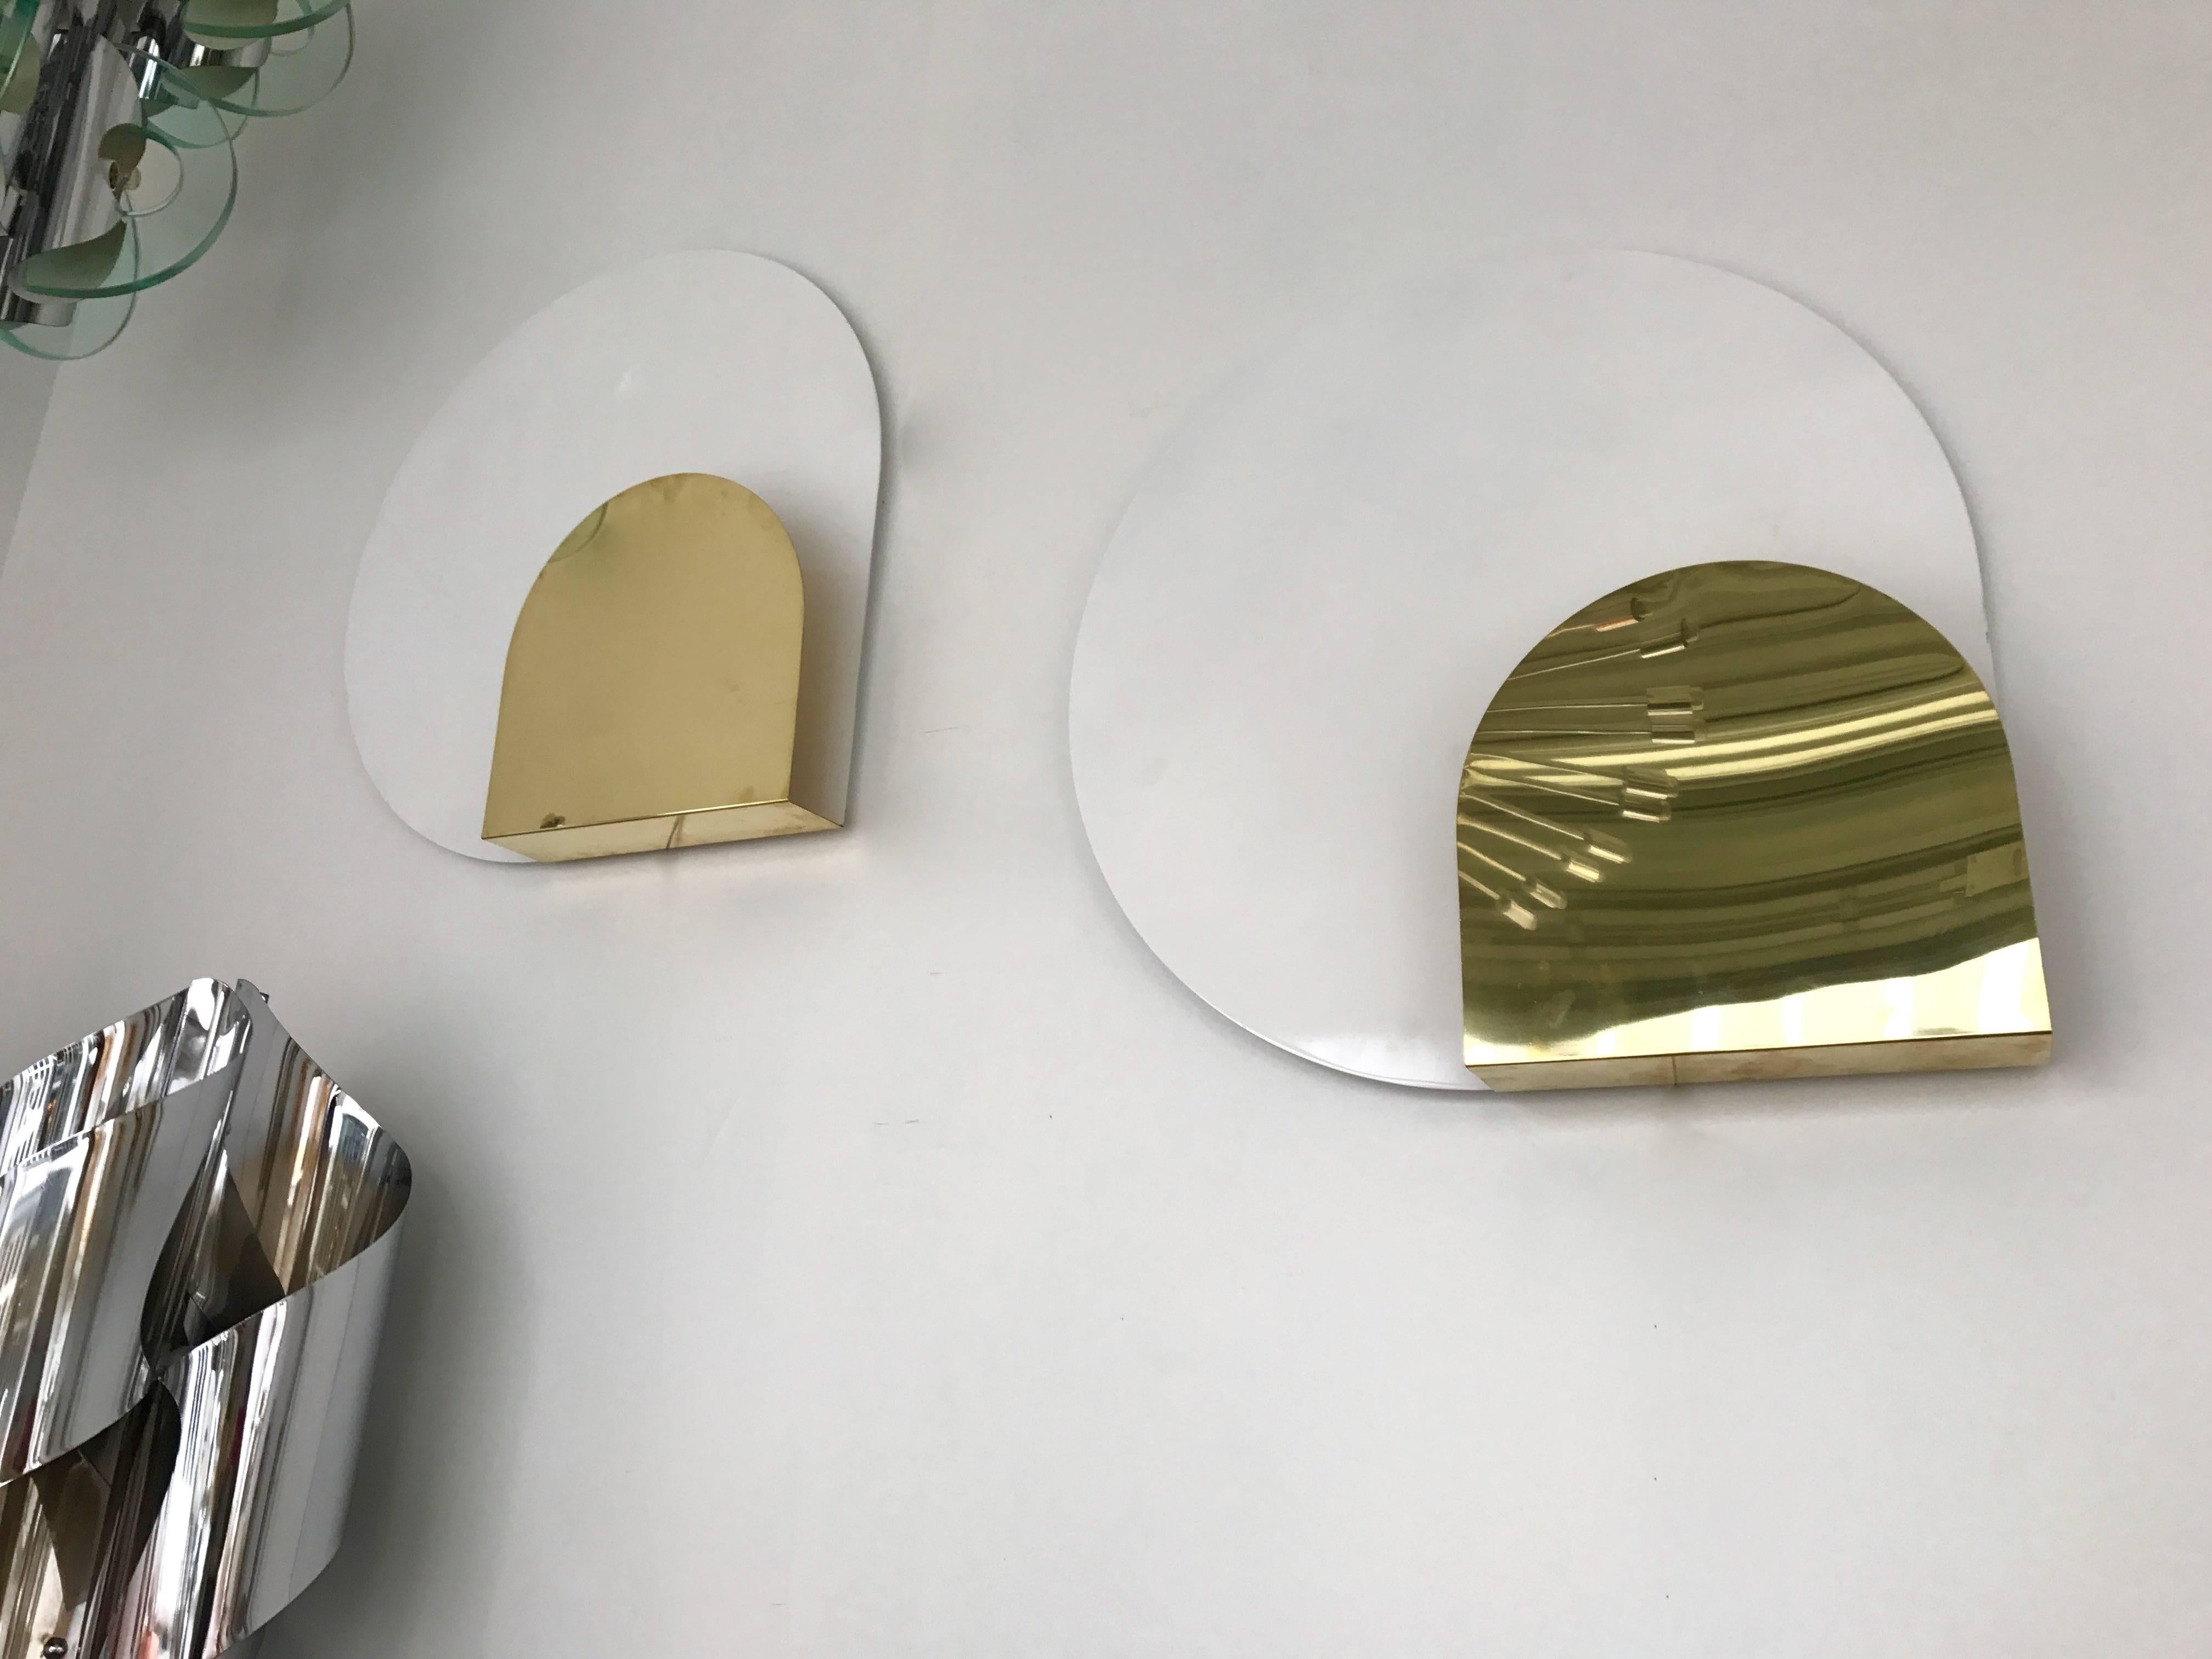 Pair of sconces or wall lights by the designer Pia Guidetti Crippa for the editor Lumi. White lacquered metal disc, brass shade for front part. Simple and elegant design. Famous manufacture like Luci, Sciolari, Reggiani, Stilux, Artemide, Arteluce,